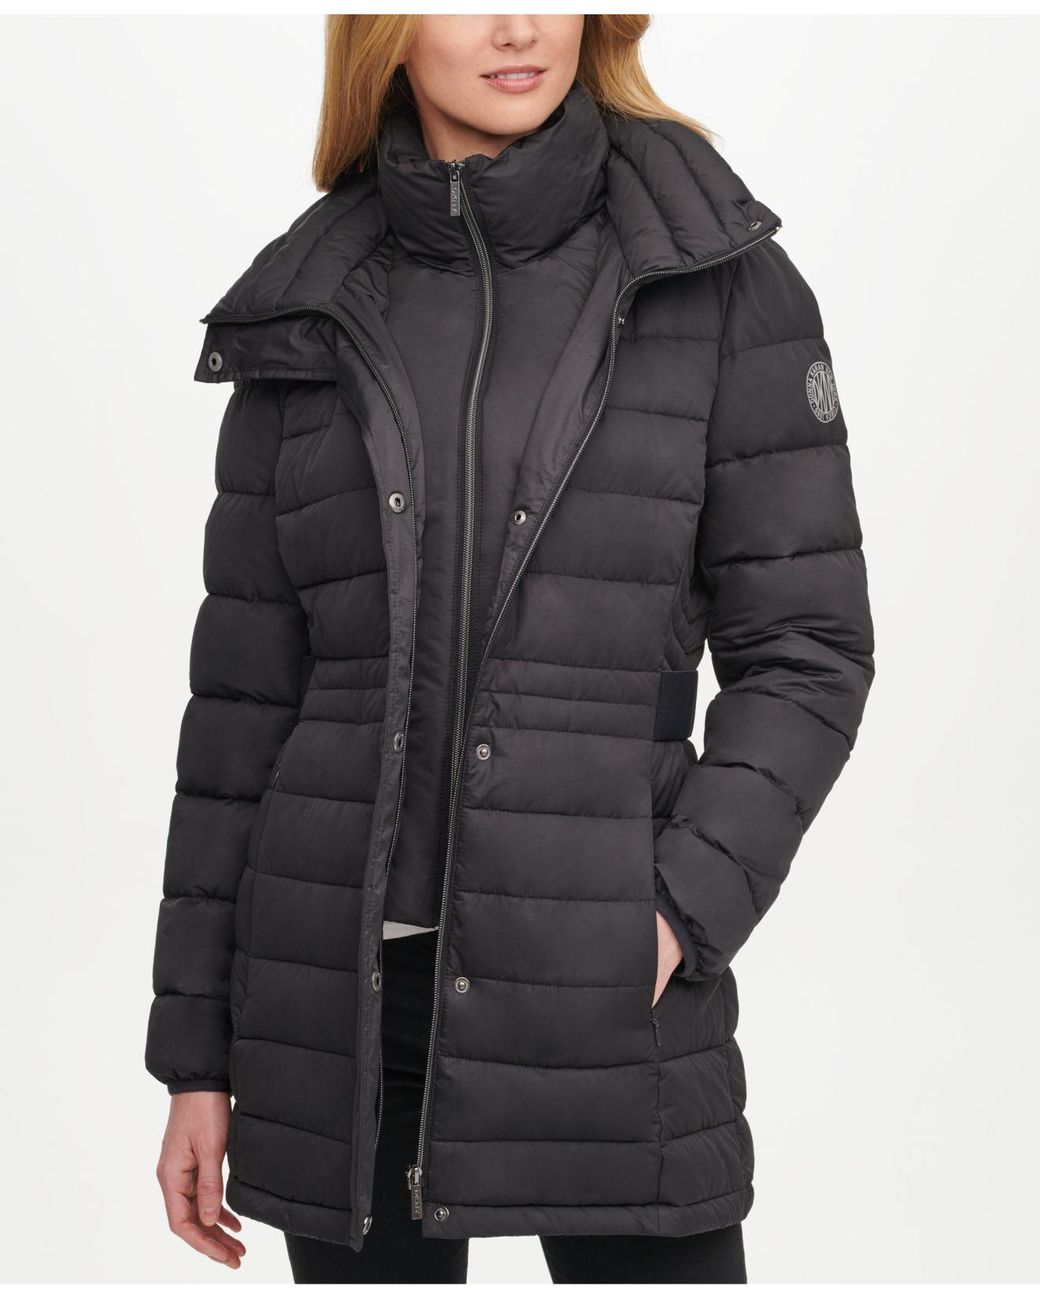 DKNY Synthetic Hooded Packable Puffer Coat in Black - Lyst